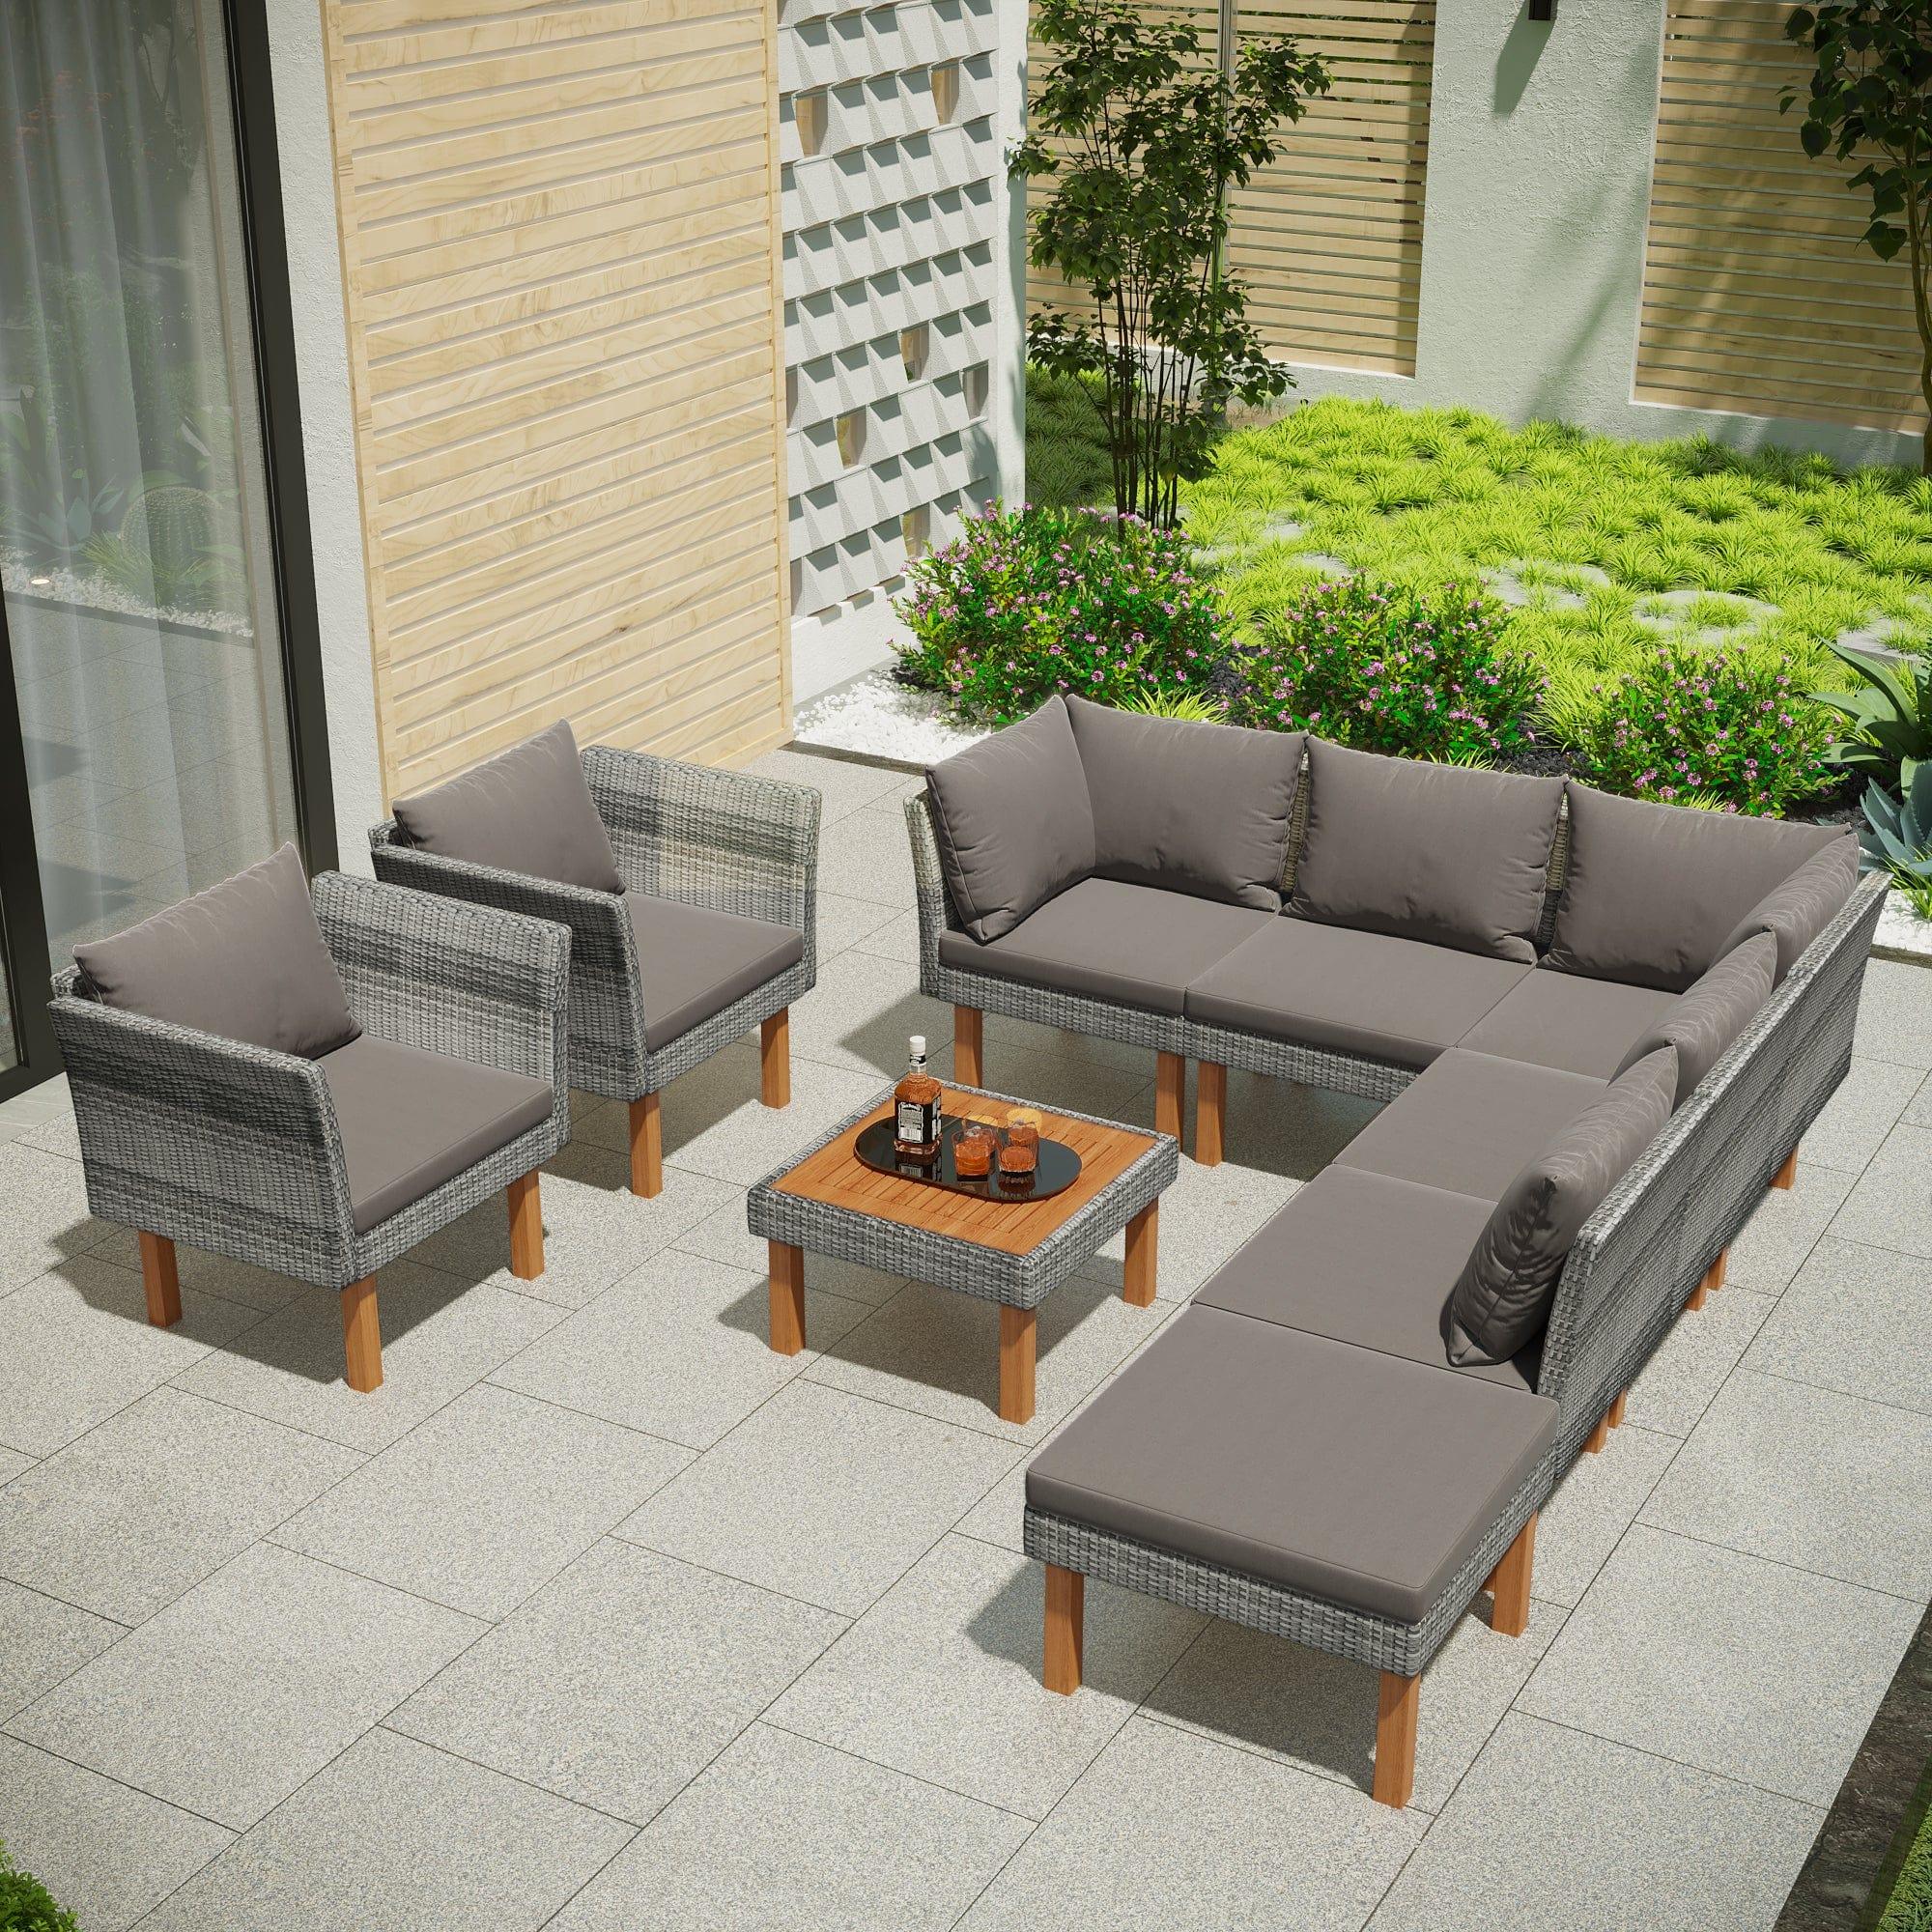 Shop GO 9-Piece Outdoor Patio Garden Wicker Sofa Set, Gray PE Rattan Sofa Set, with Wood Legs, Acacia Wood Tabletop, Armrest Chairs with Gray Cushions Mademoiselle Home Decor